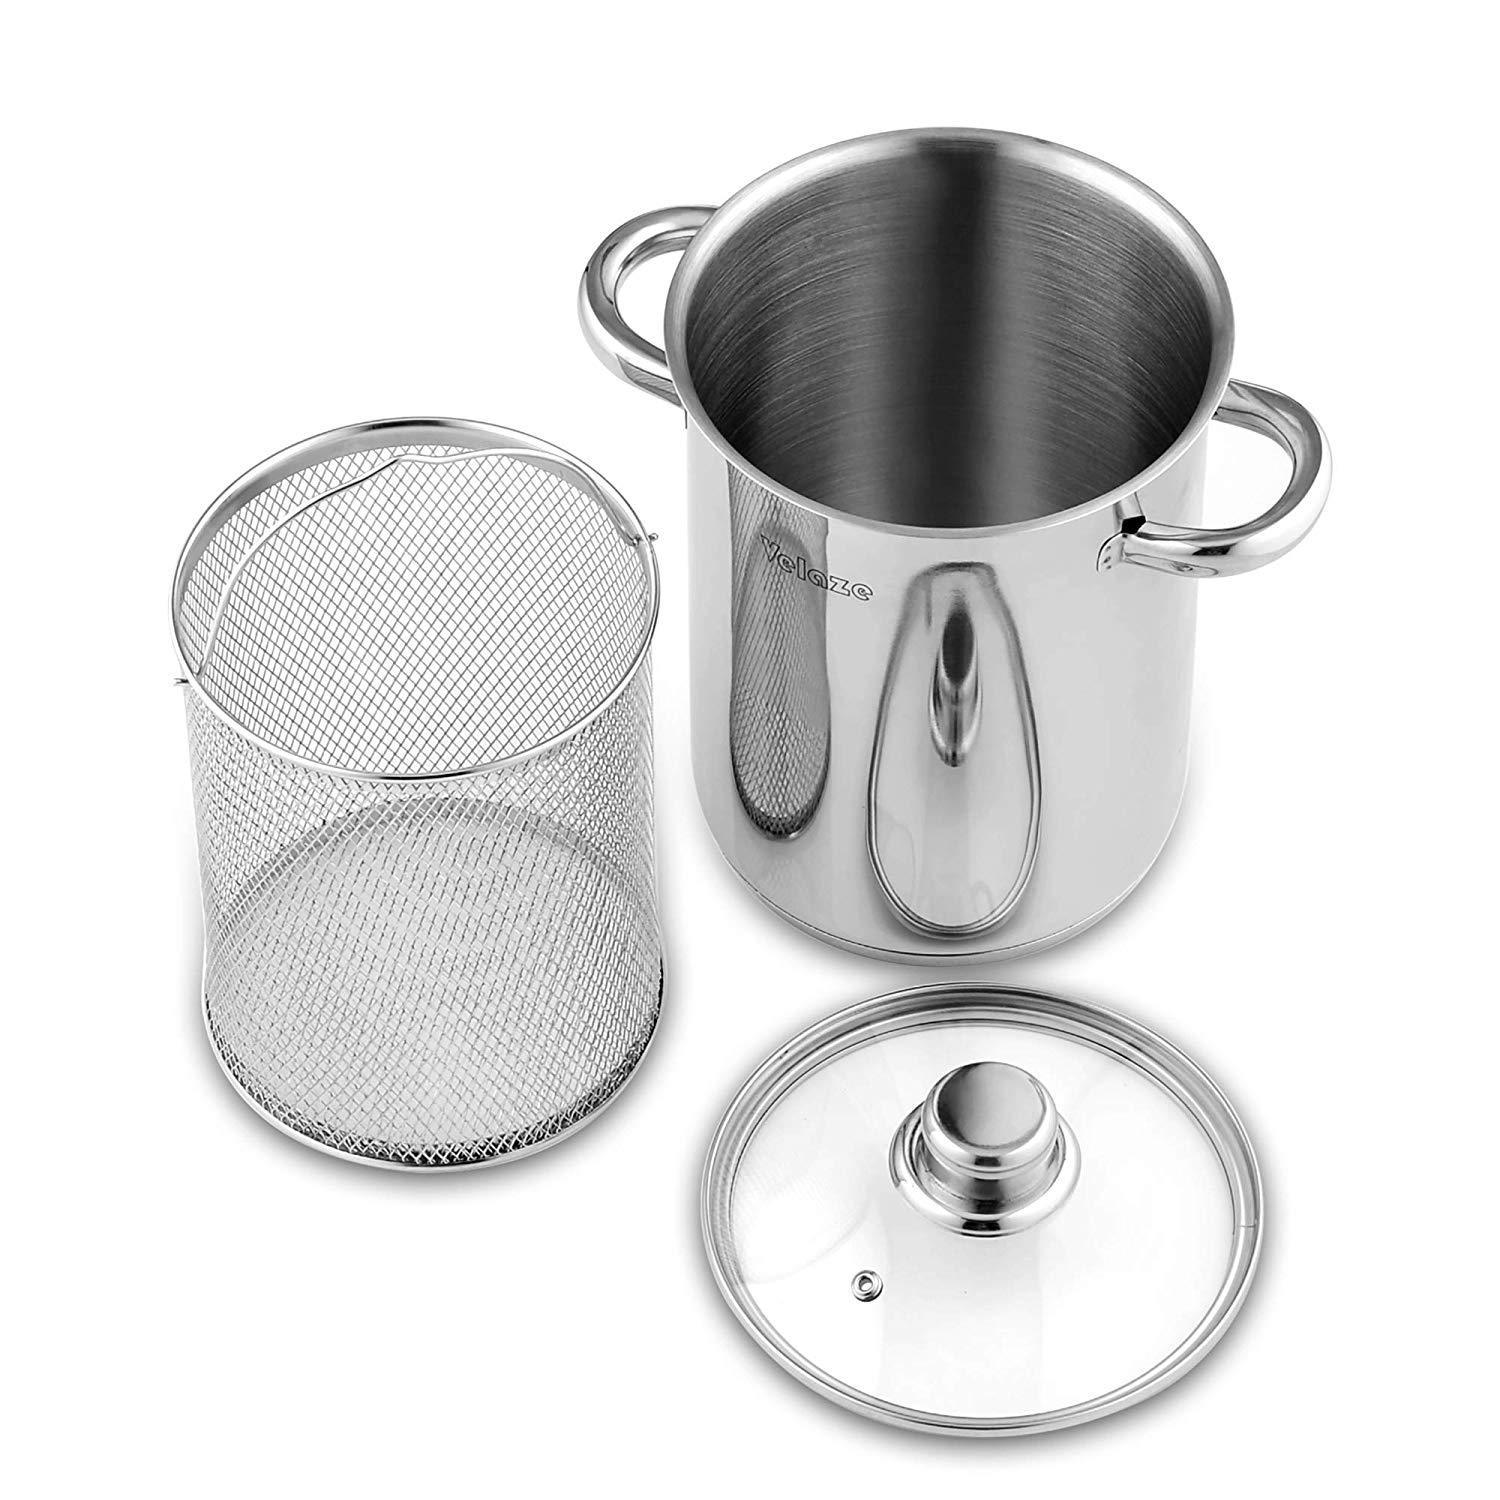 Asparagus Pot Stainless Steel 4L Vegetable Asparagus Steamer Pot with Basket and Lid Pasta Pot Stovetop Steamer Cooker - Nordic Side - and, Asparagus, Basket, Cooker, Lid, Pasta, Pot, Stainle